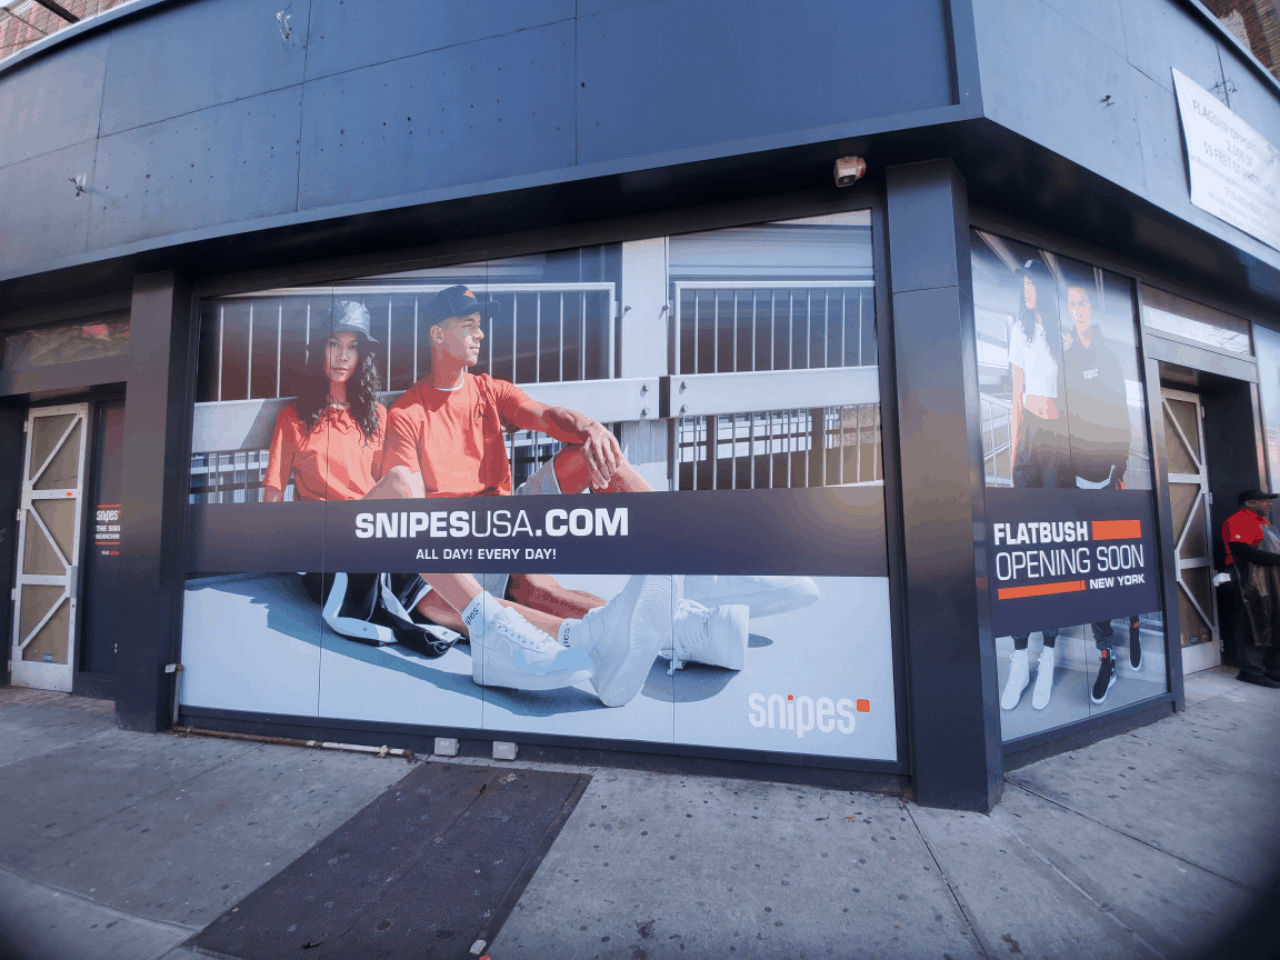 Barclays to open pop-up shops at 'Featured on Flatbush